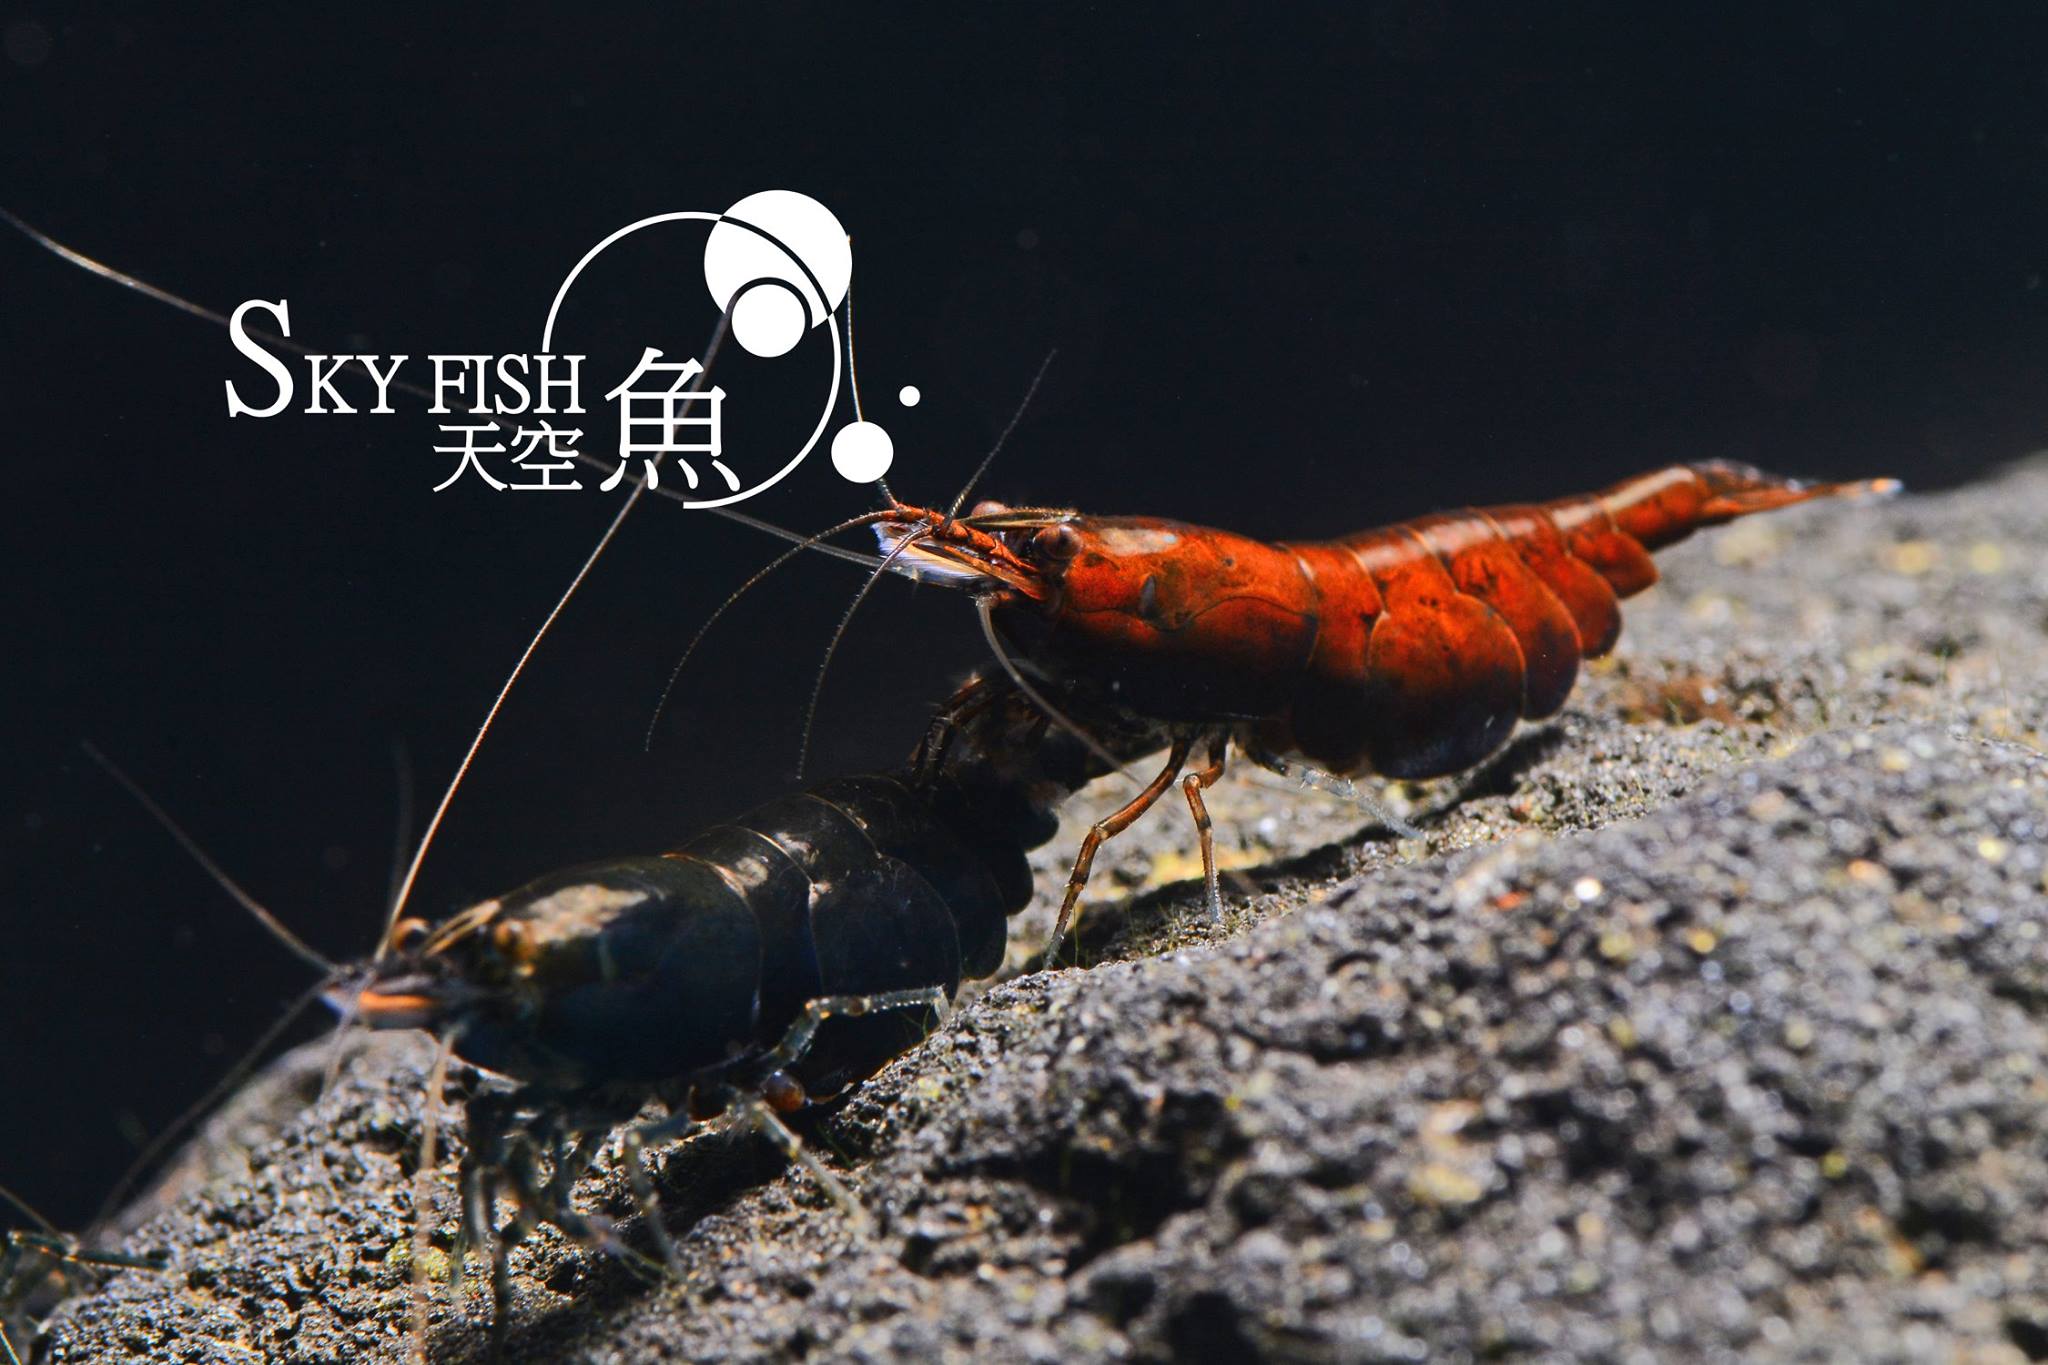 Skyfish on Twitter: "NeoCaridina in Skyfish ---- Red Onyx Shrimp!! Also named Bronze shrimp. must be specially selected from NeoCaridina the process is complicated. Features a deep burgundy body with